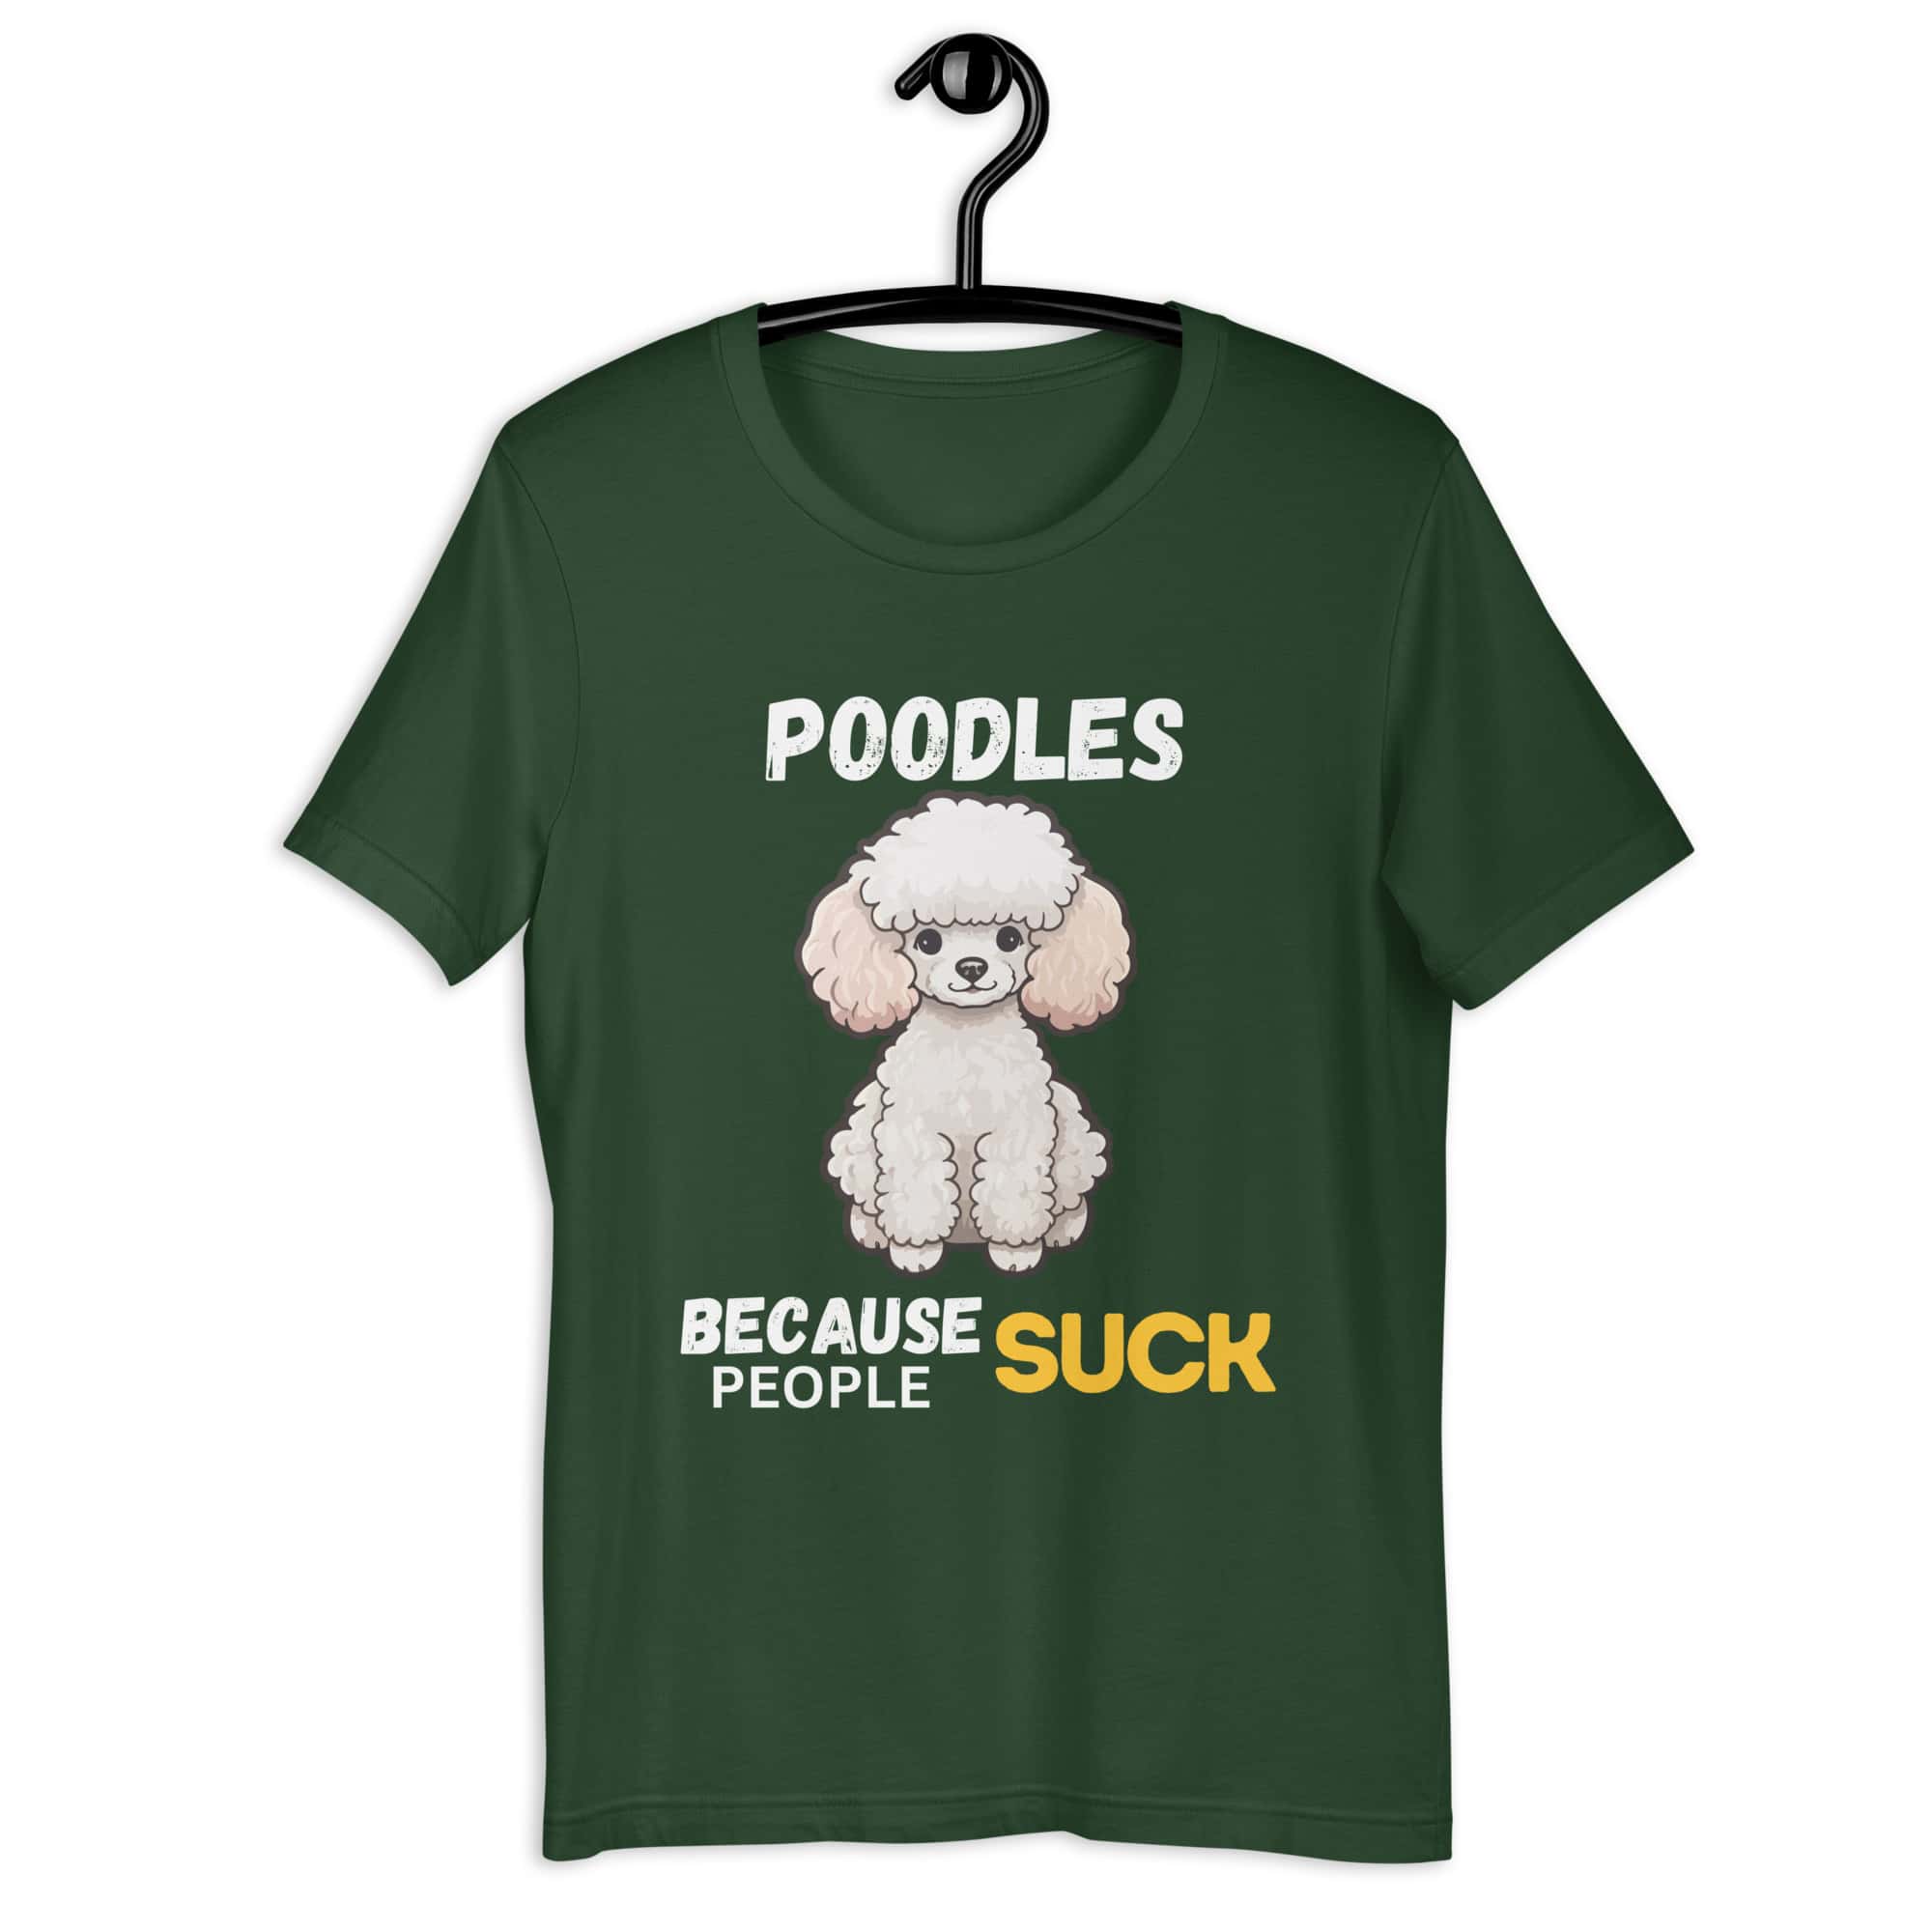 Poodles Because People Suck Unisex T-Shirt green